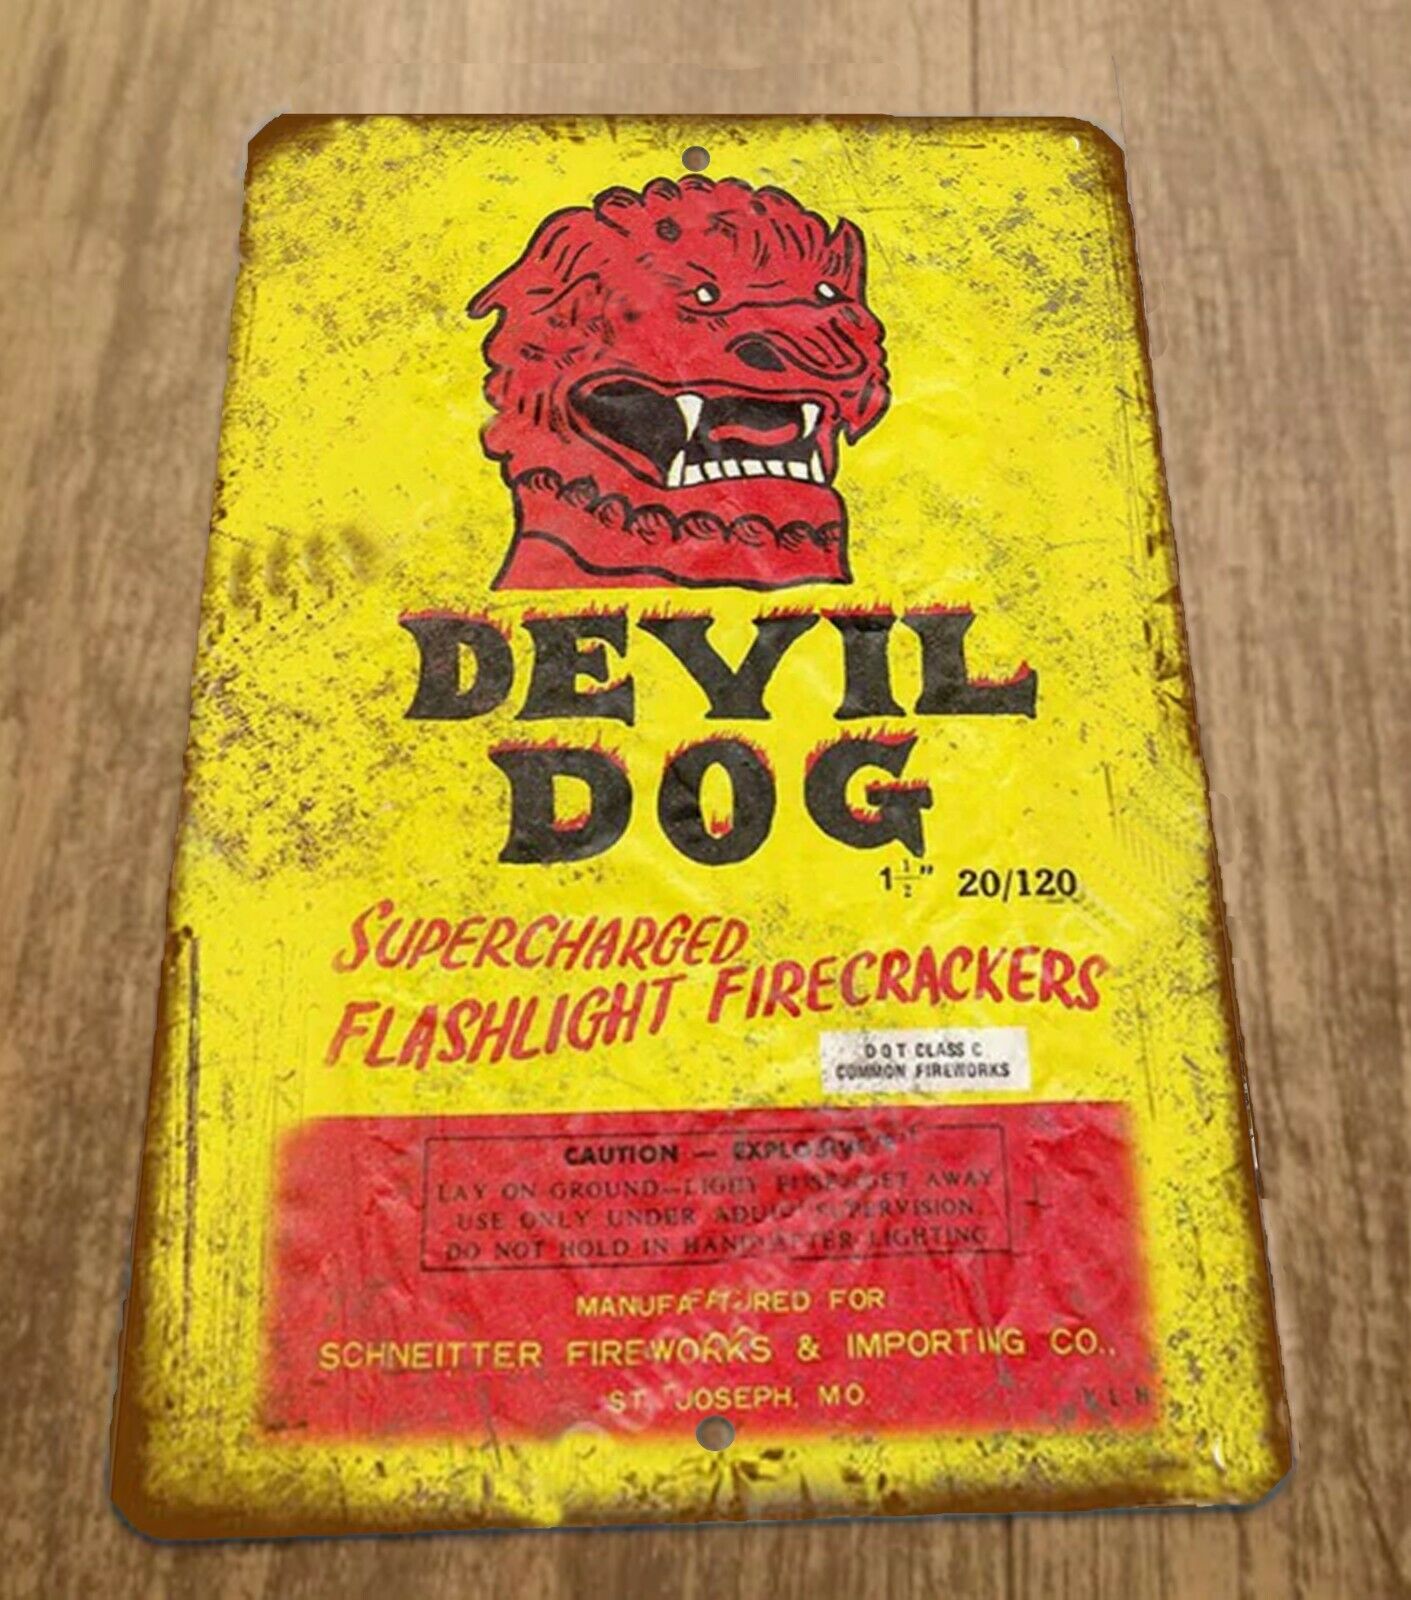 Vintage Look Devil Dog Supercharged Flashlight Firecrackers 8x12 Metal Wall Sign